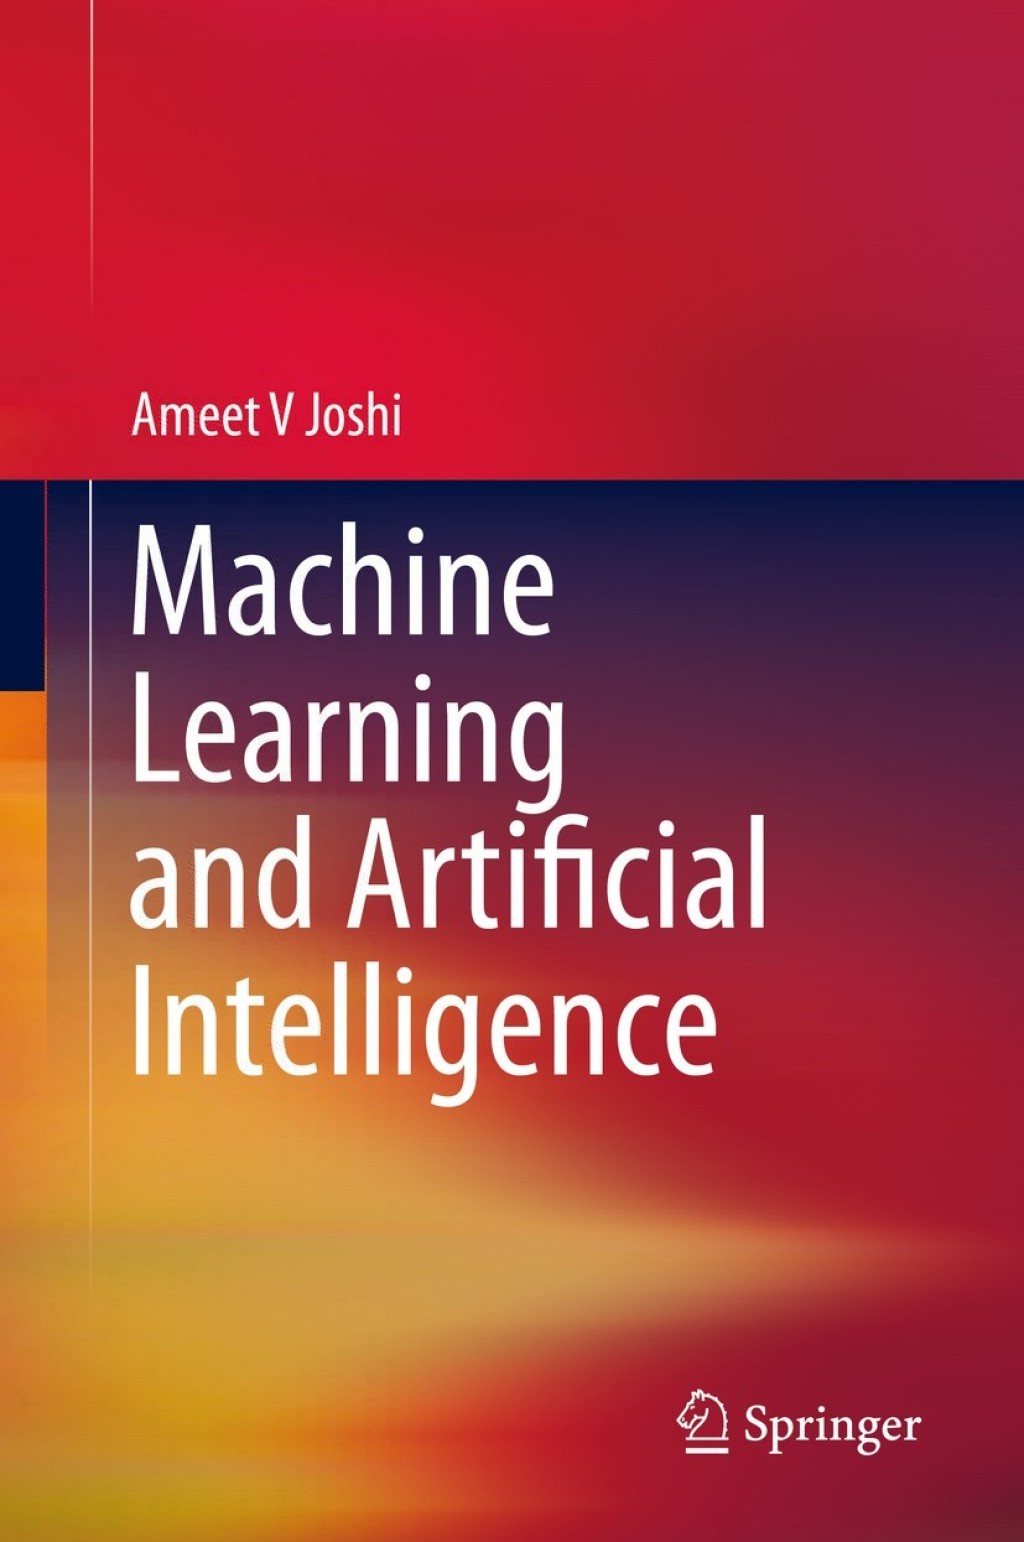 Machine Learning and Artificial Intelligence (eBook) - Ameet V Joshi